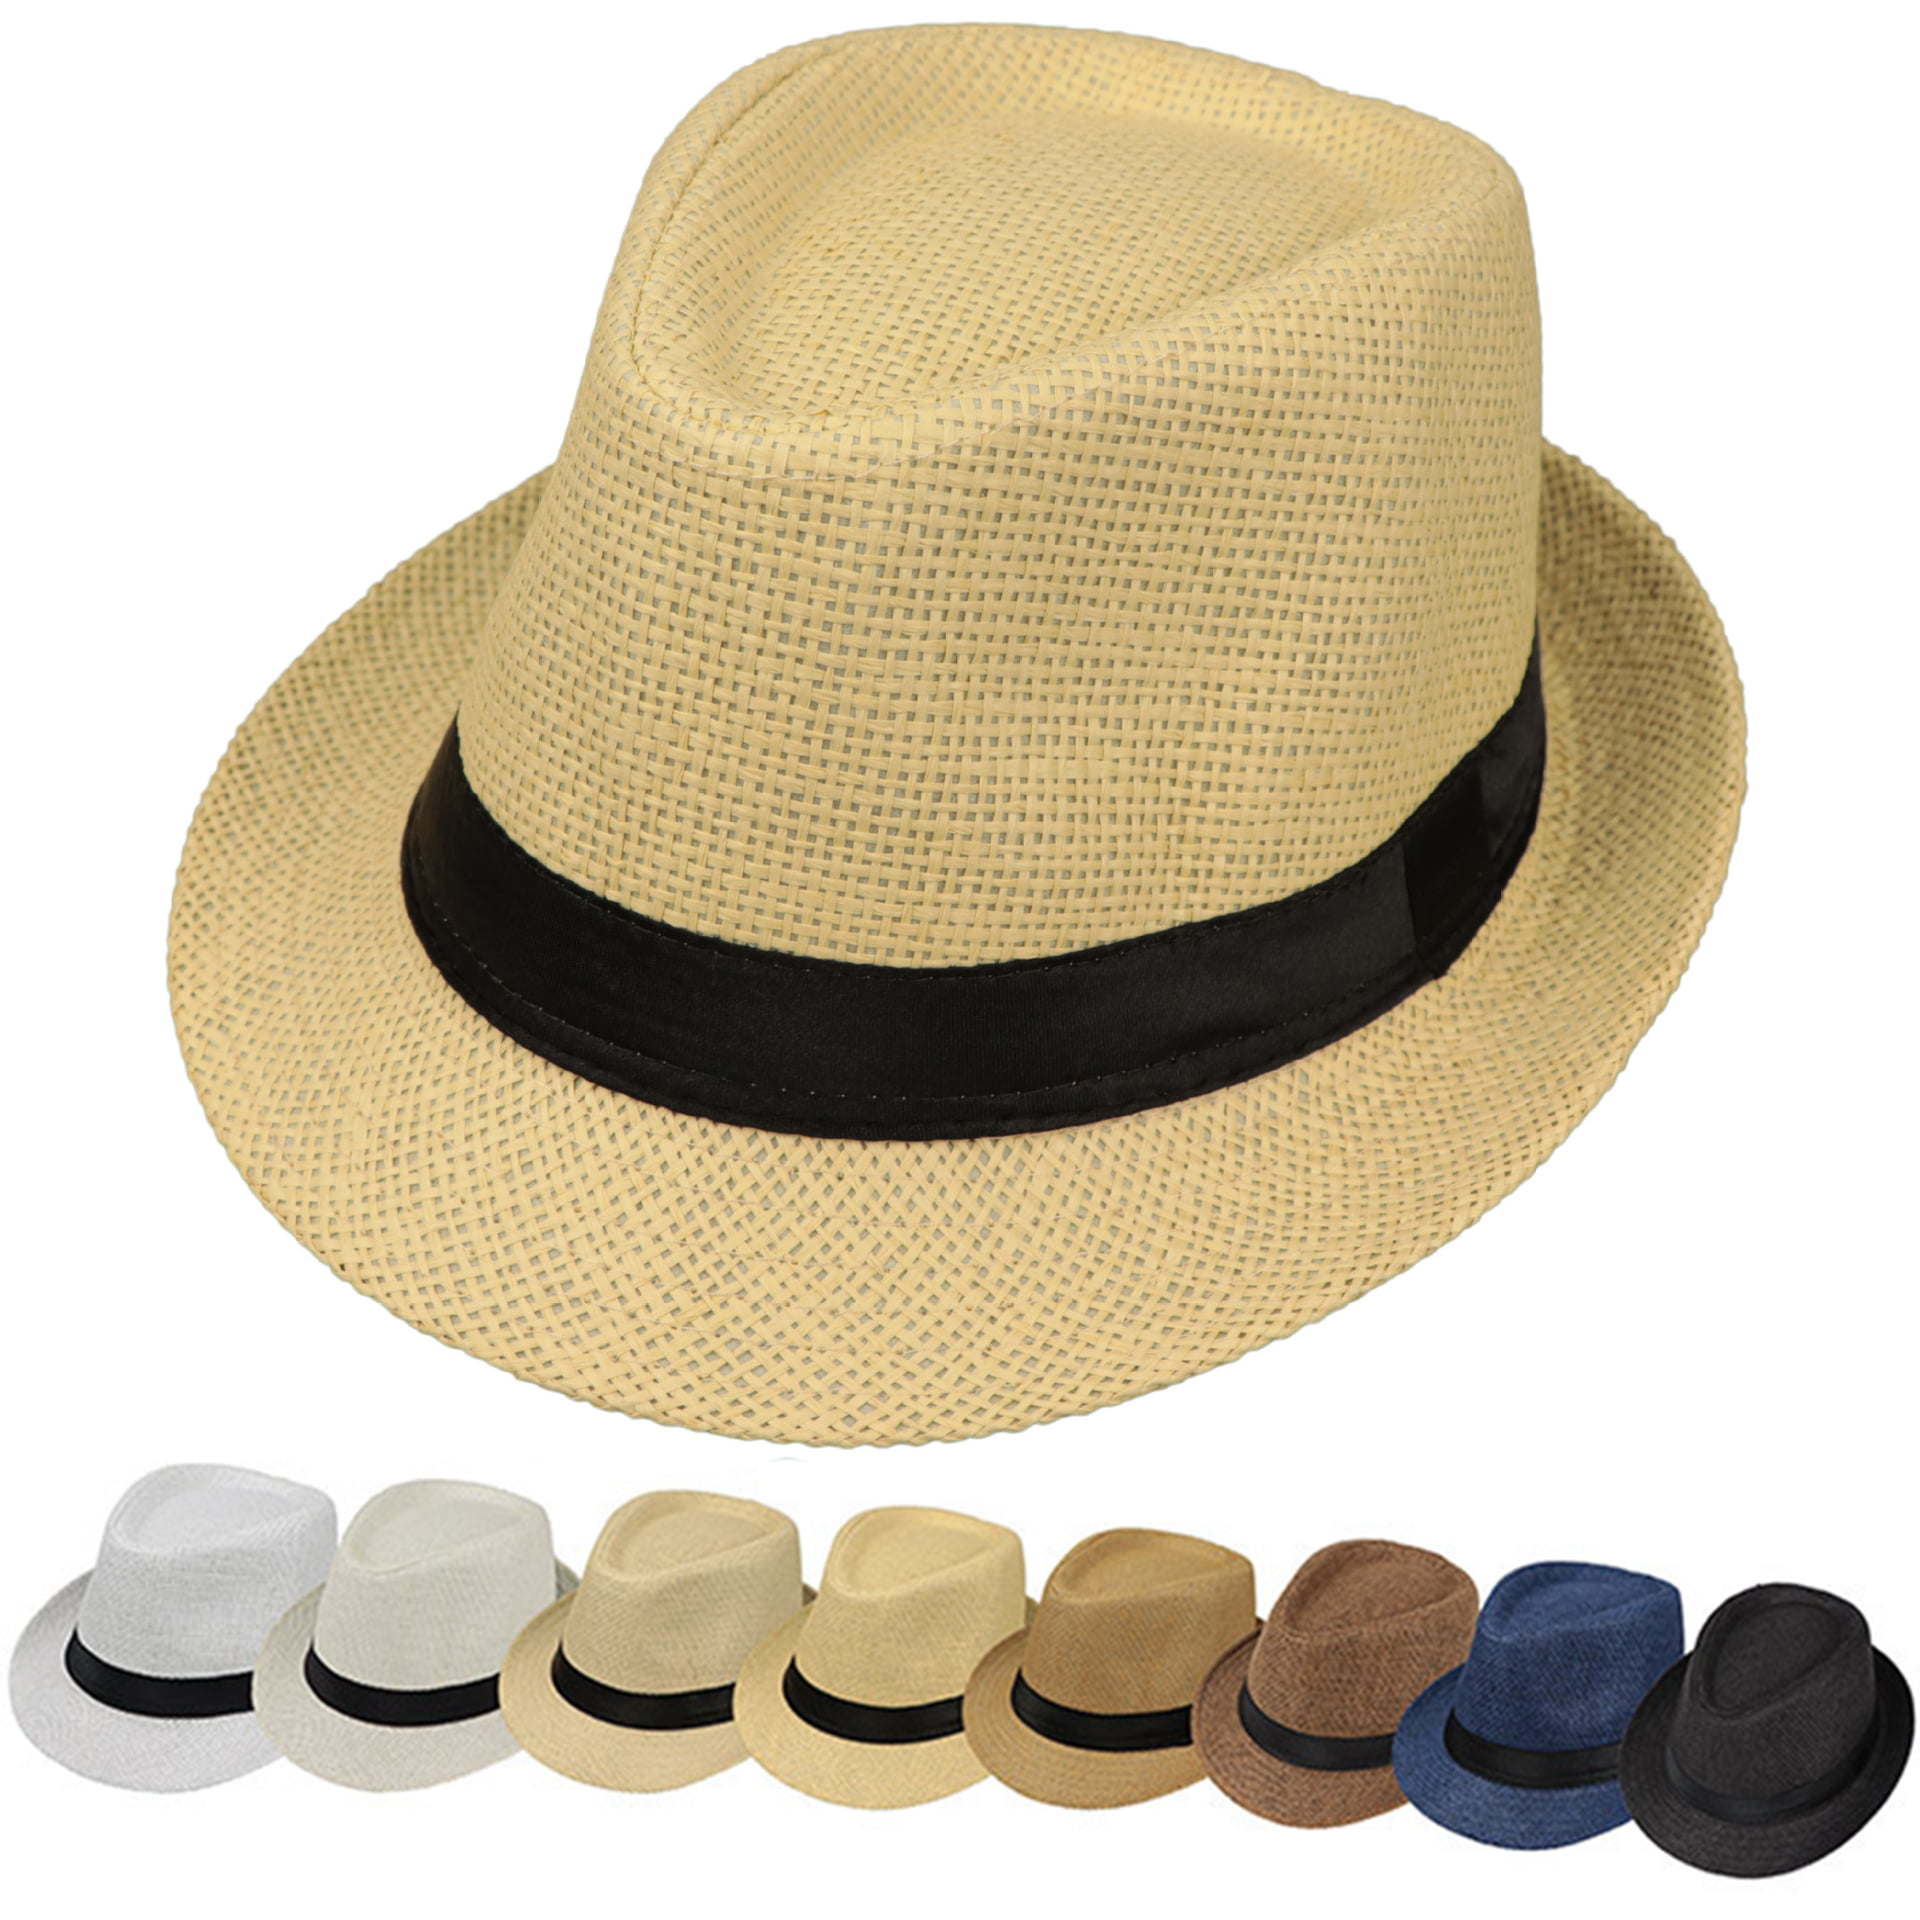 Hat Tape Roll 60 (5 Feet) Hats Size Reducer Foam Sizing Strip Insert for Fedora